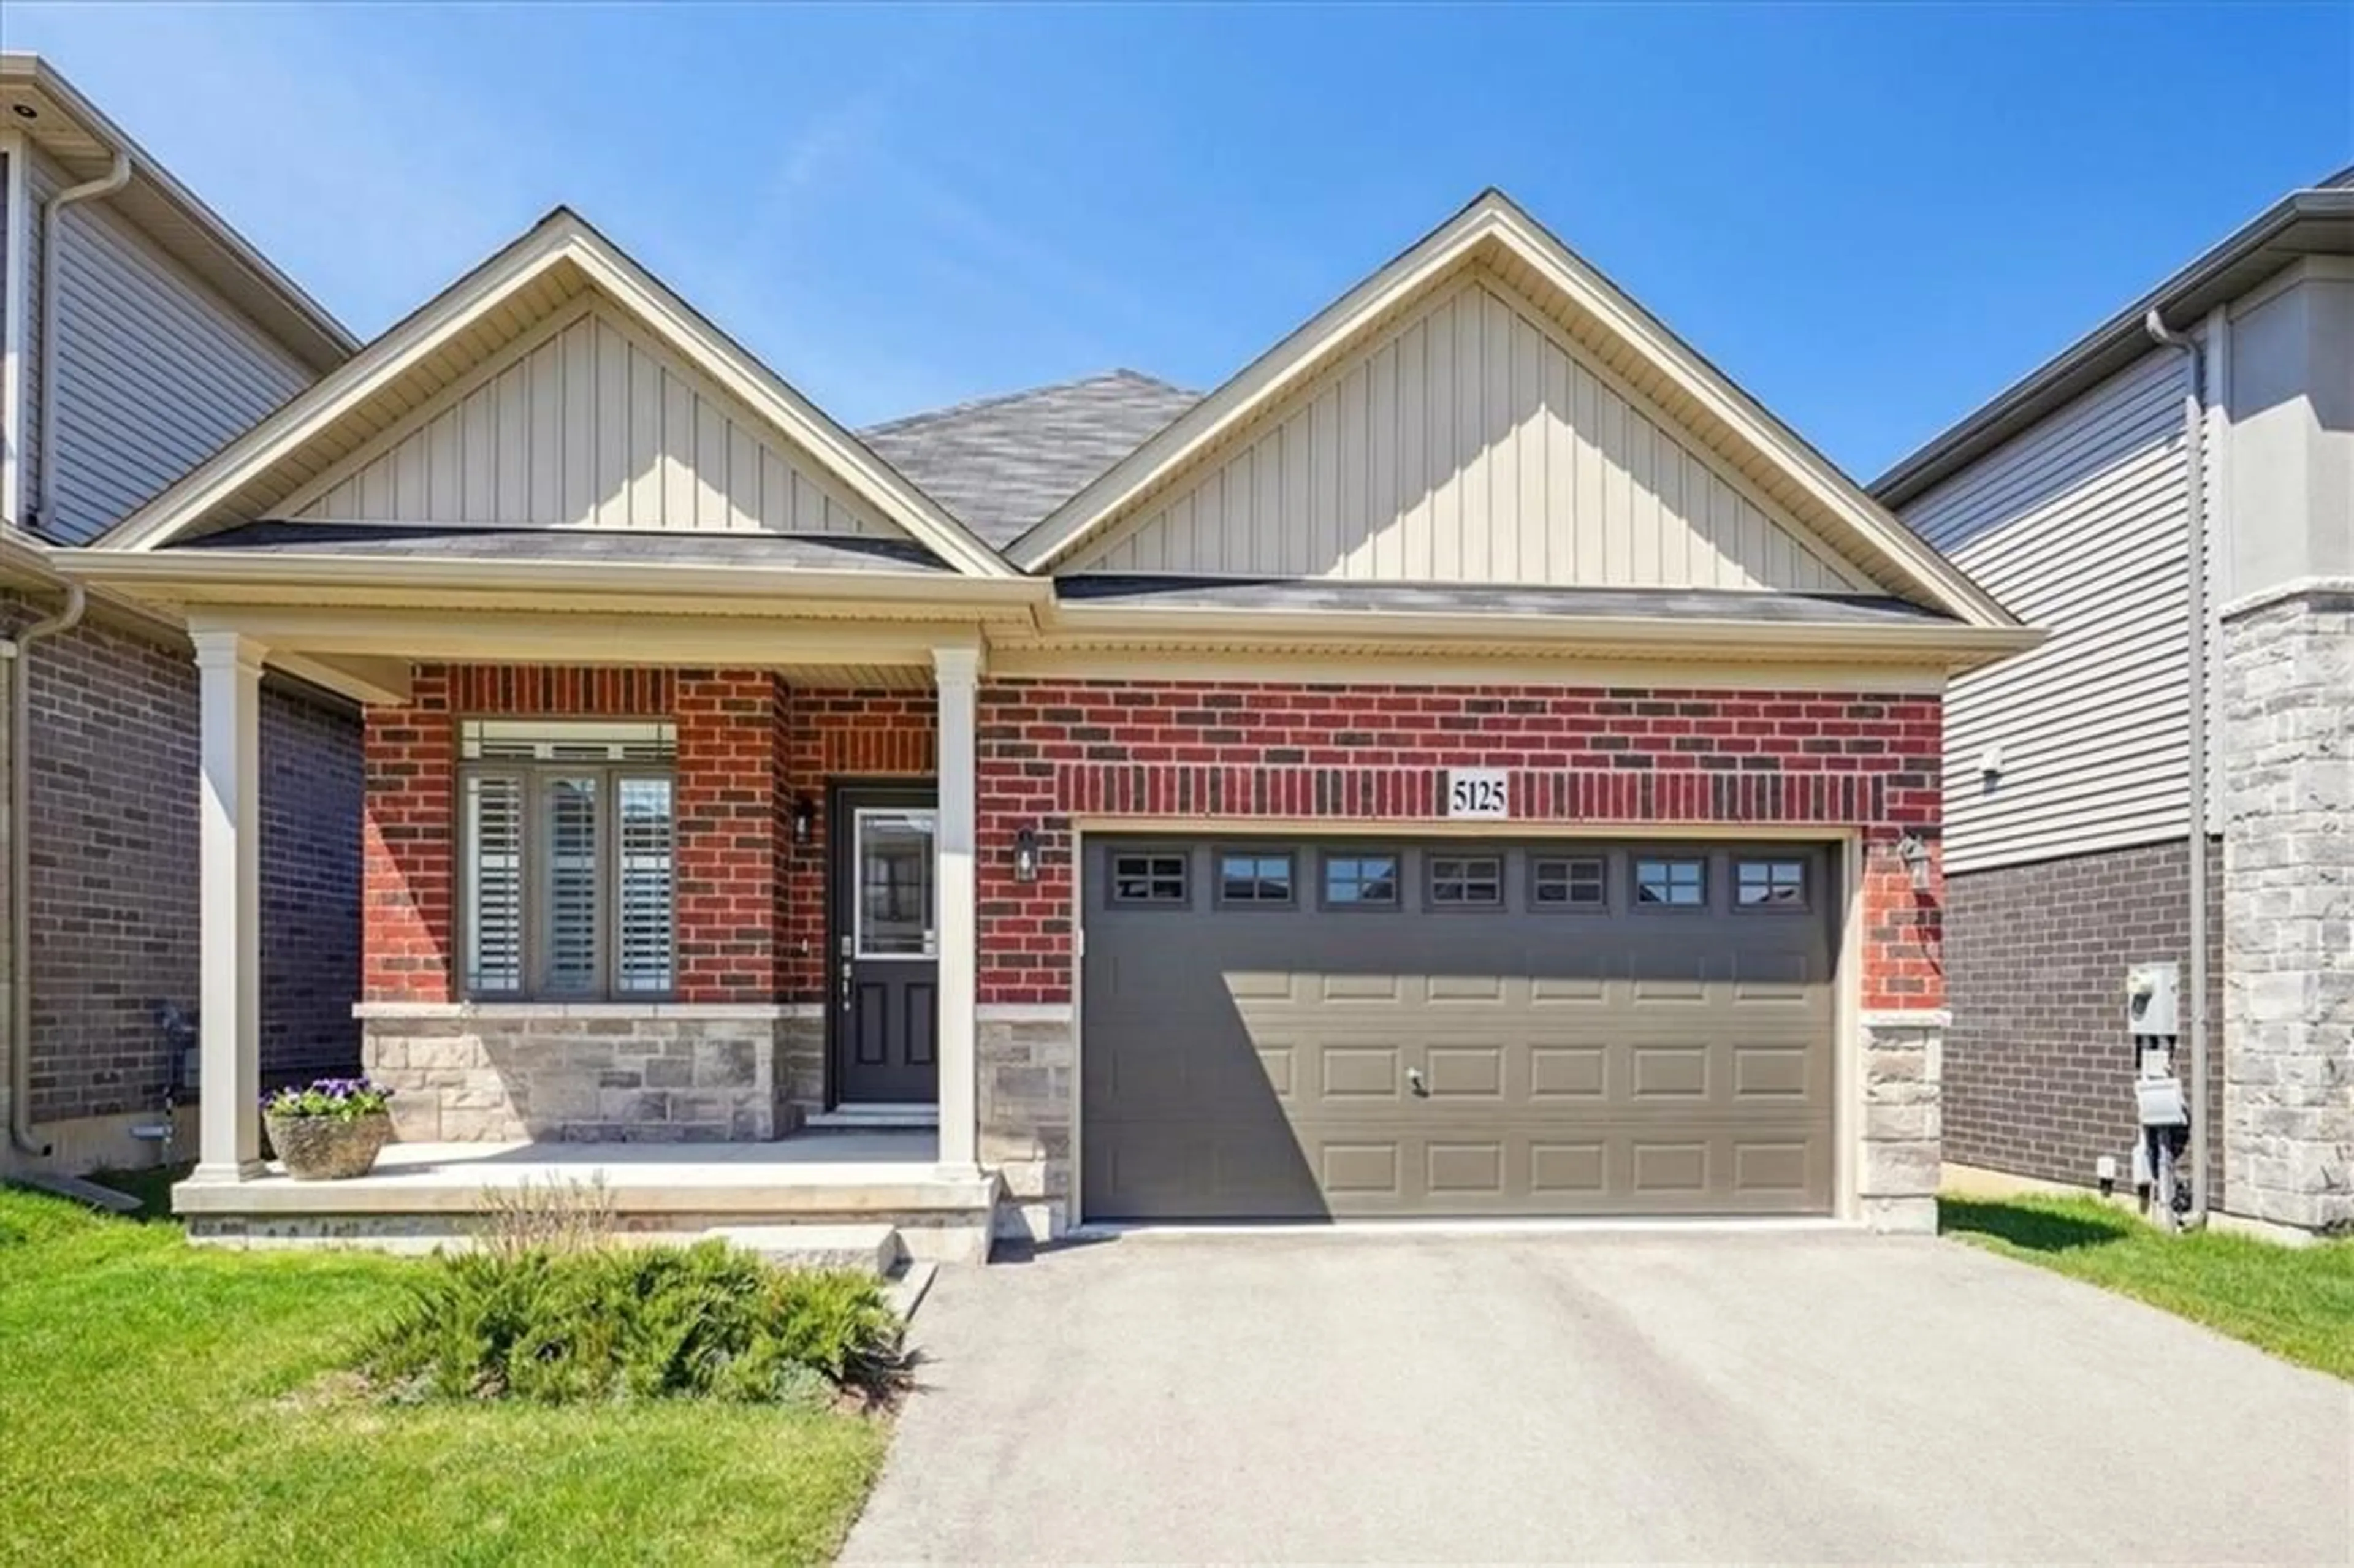 Home with brick exterior material for 5125 ROSE Ave, Beamsville Ontario L3J 0K1